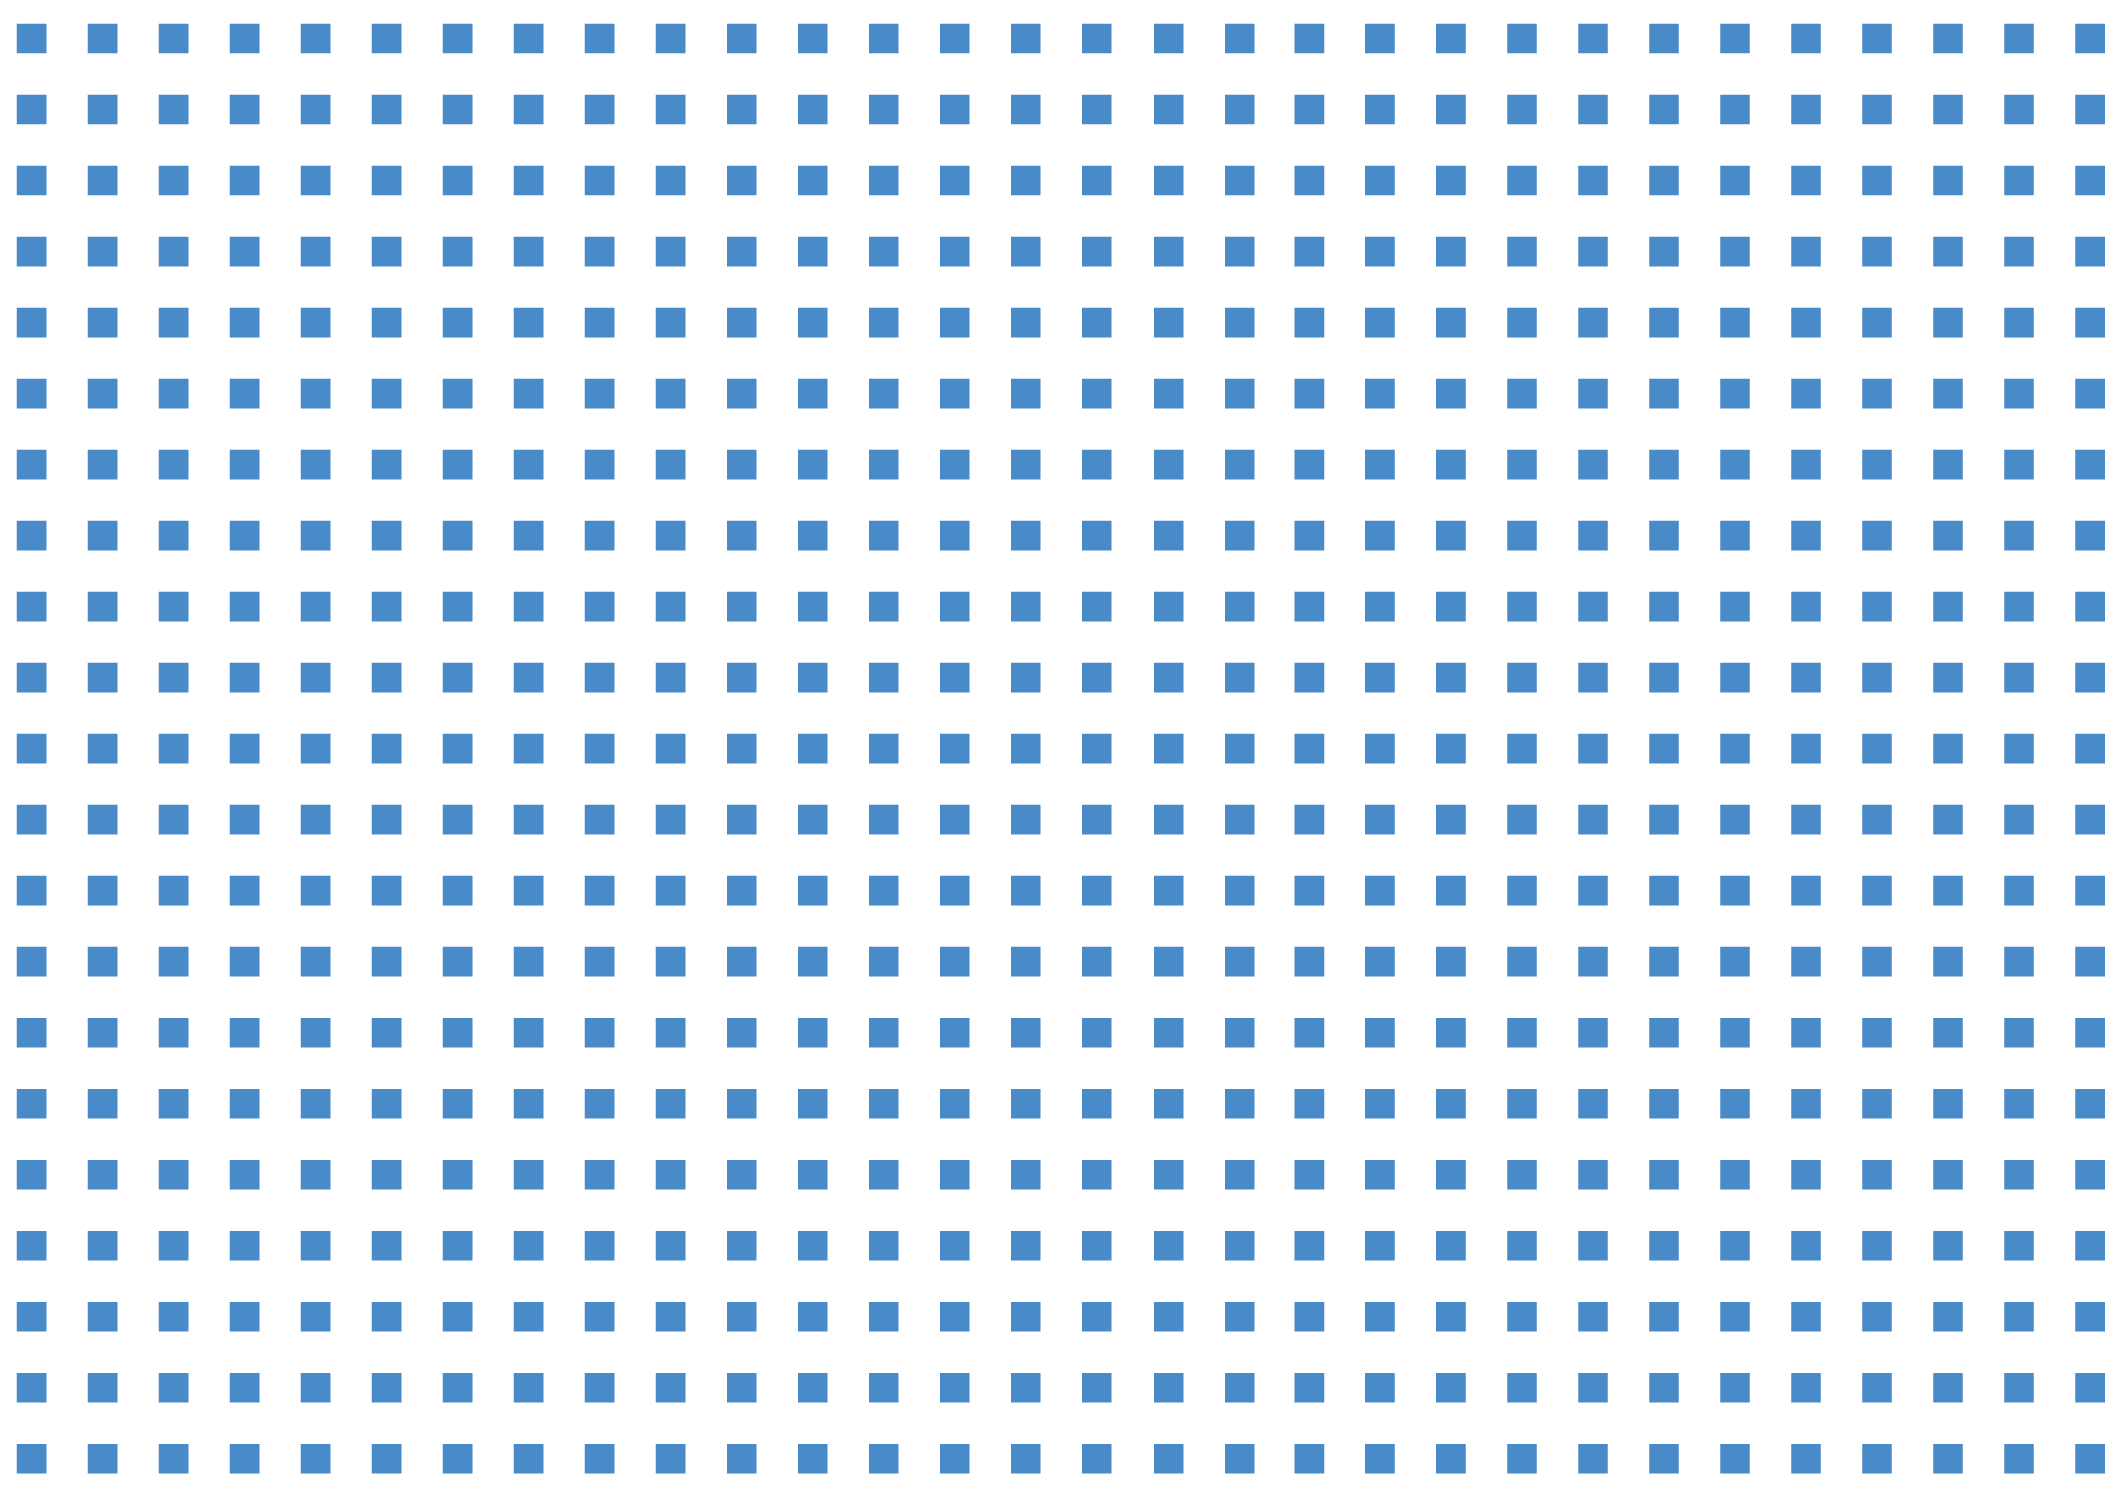 Dense grid of hundreds of squares, all shaded blue